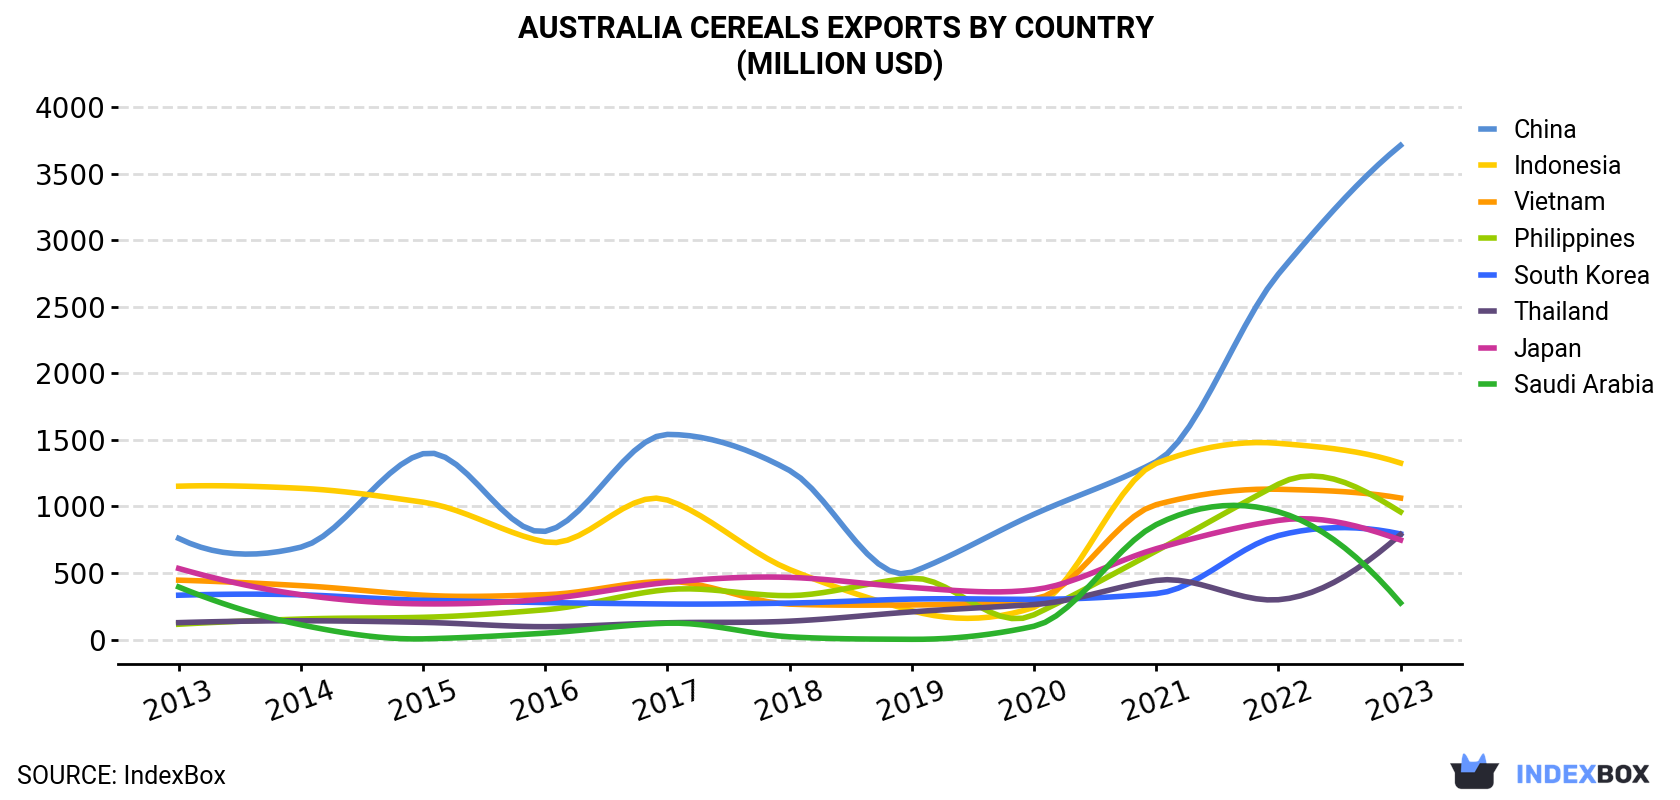 Australia Cereals Exports By Country (Million USD)